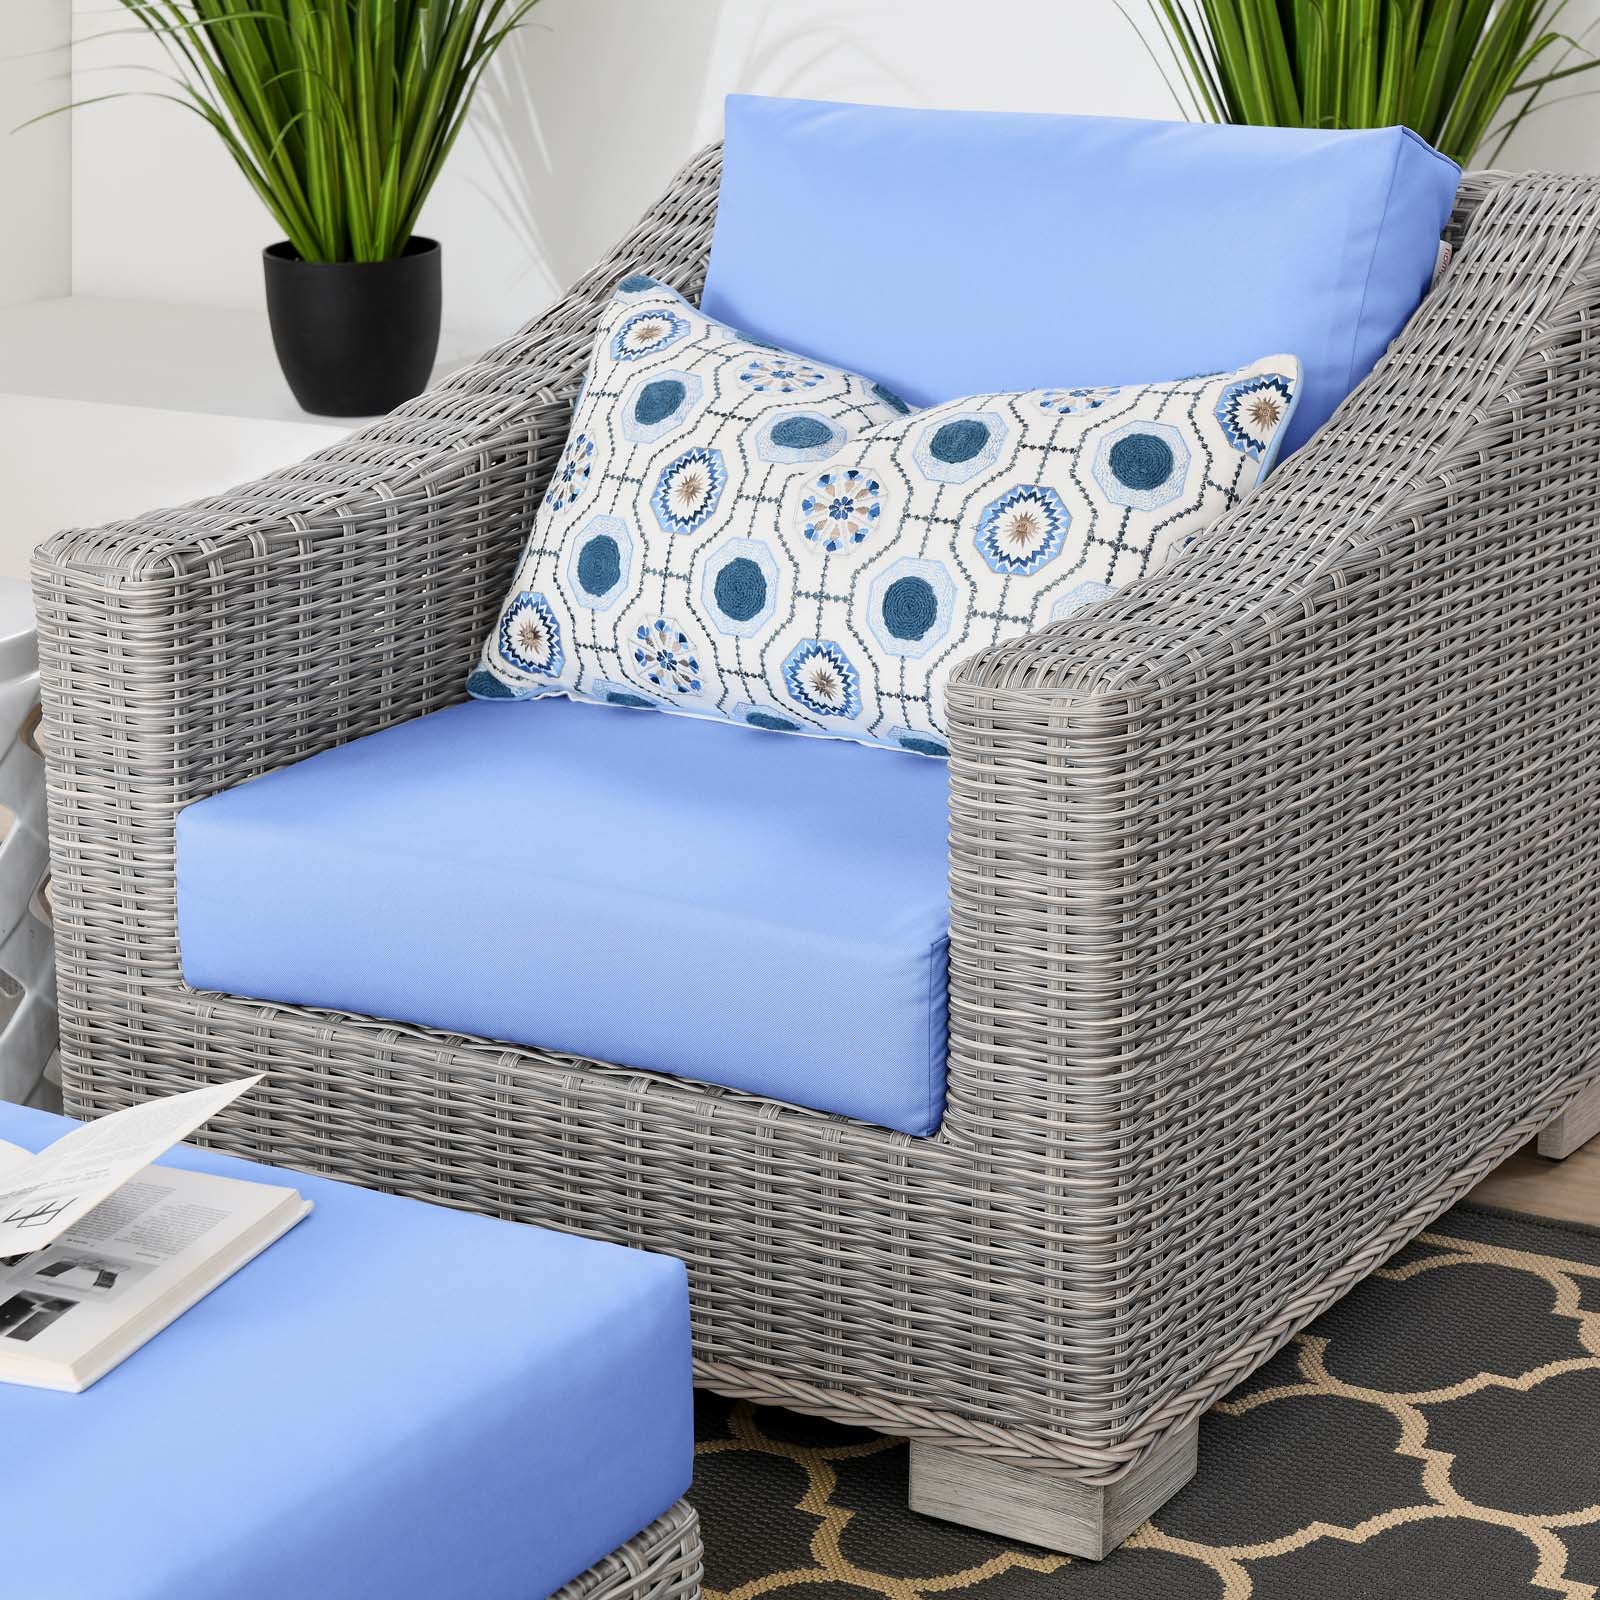 Conway Outdoor Patio Wicker Rattan 2-Piece Armchair and Ottoman Set - East Shore Modern Home Furnishings